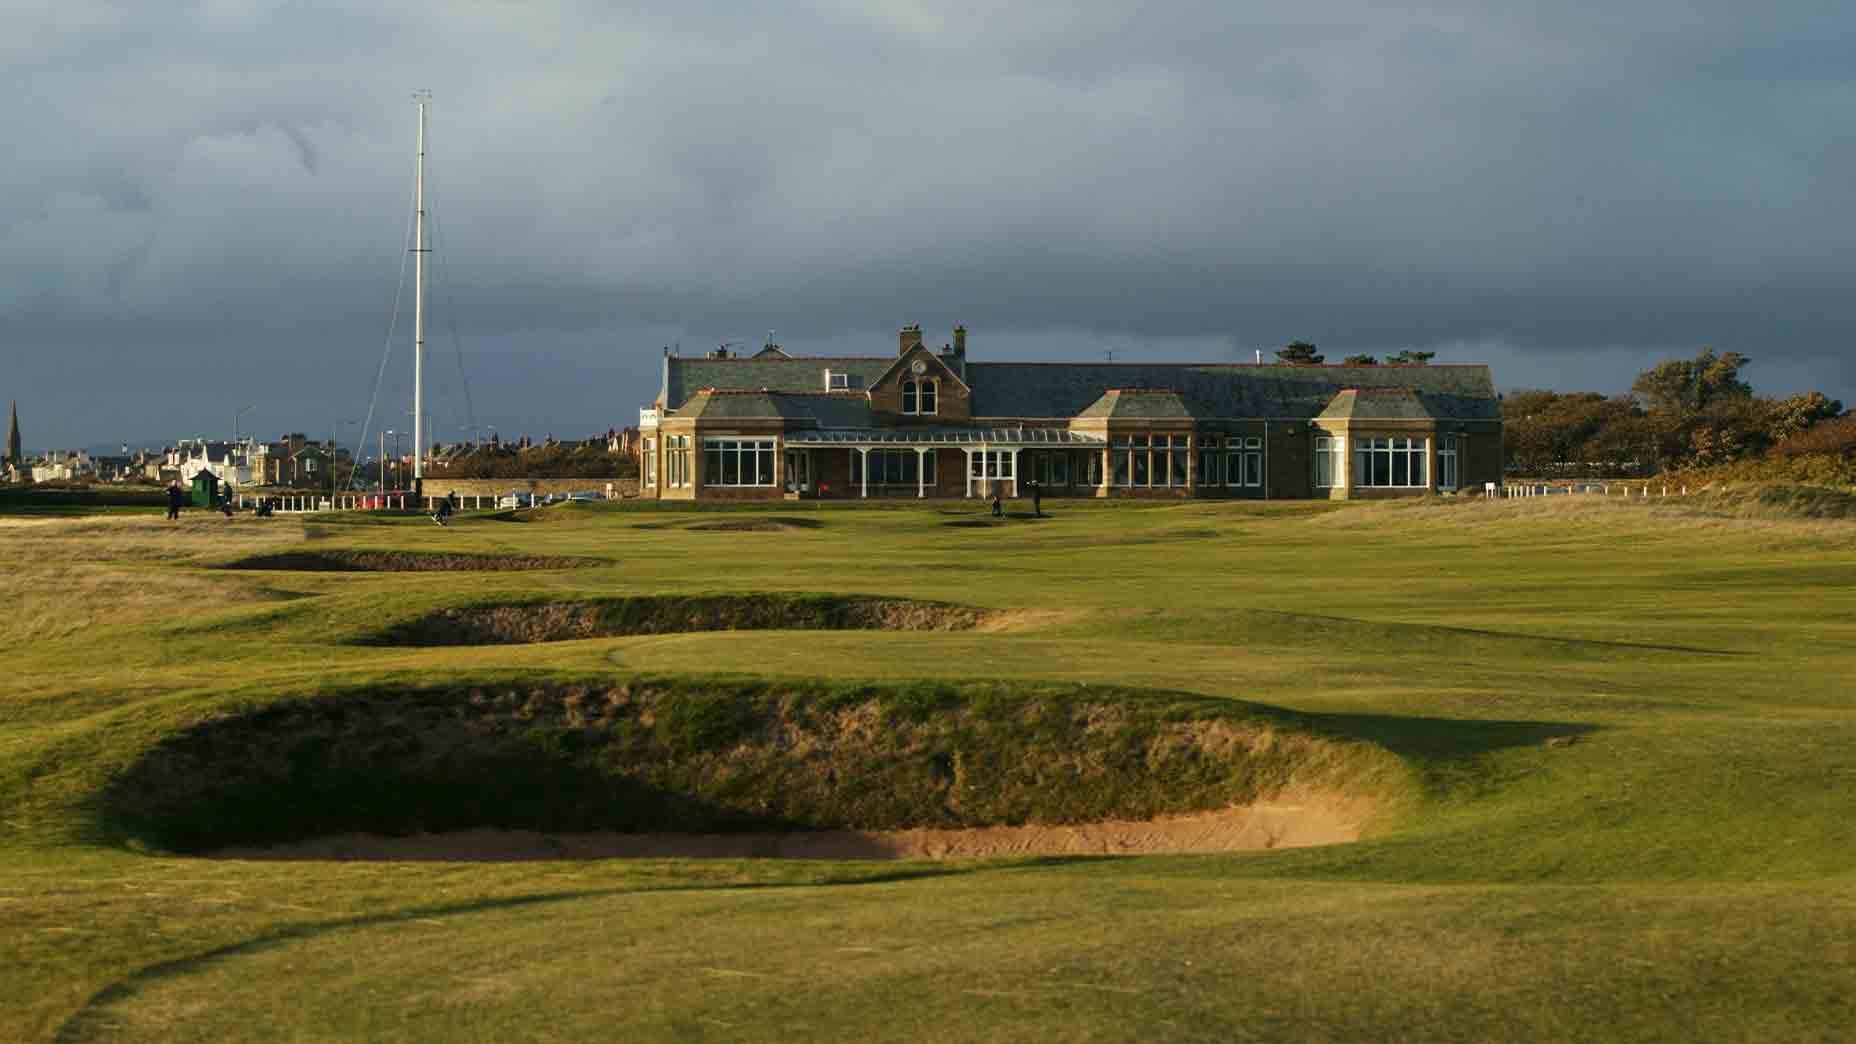 Check out the next 3 confirmed British Open venues in the Open rota